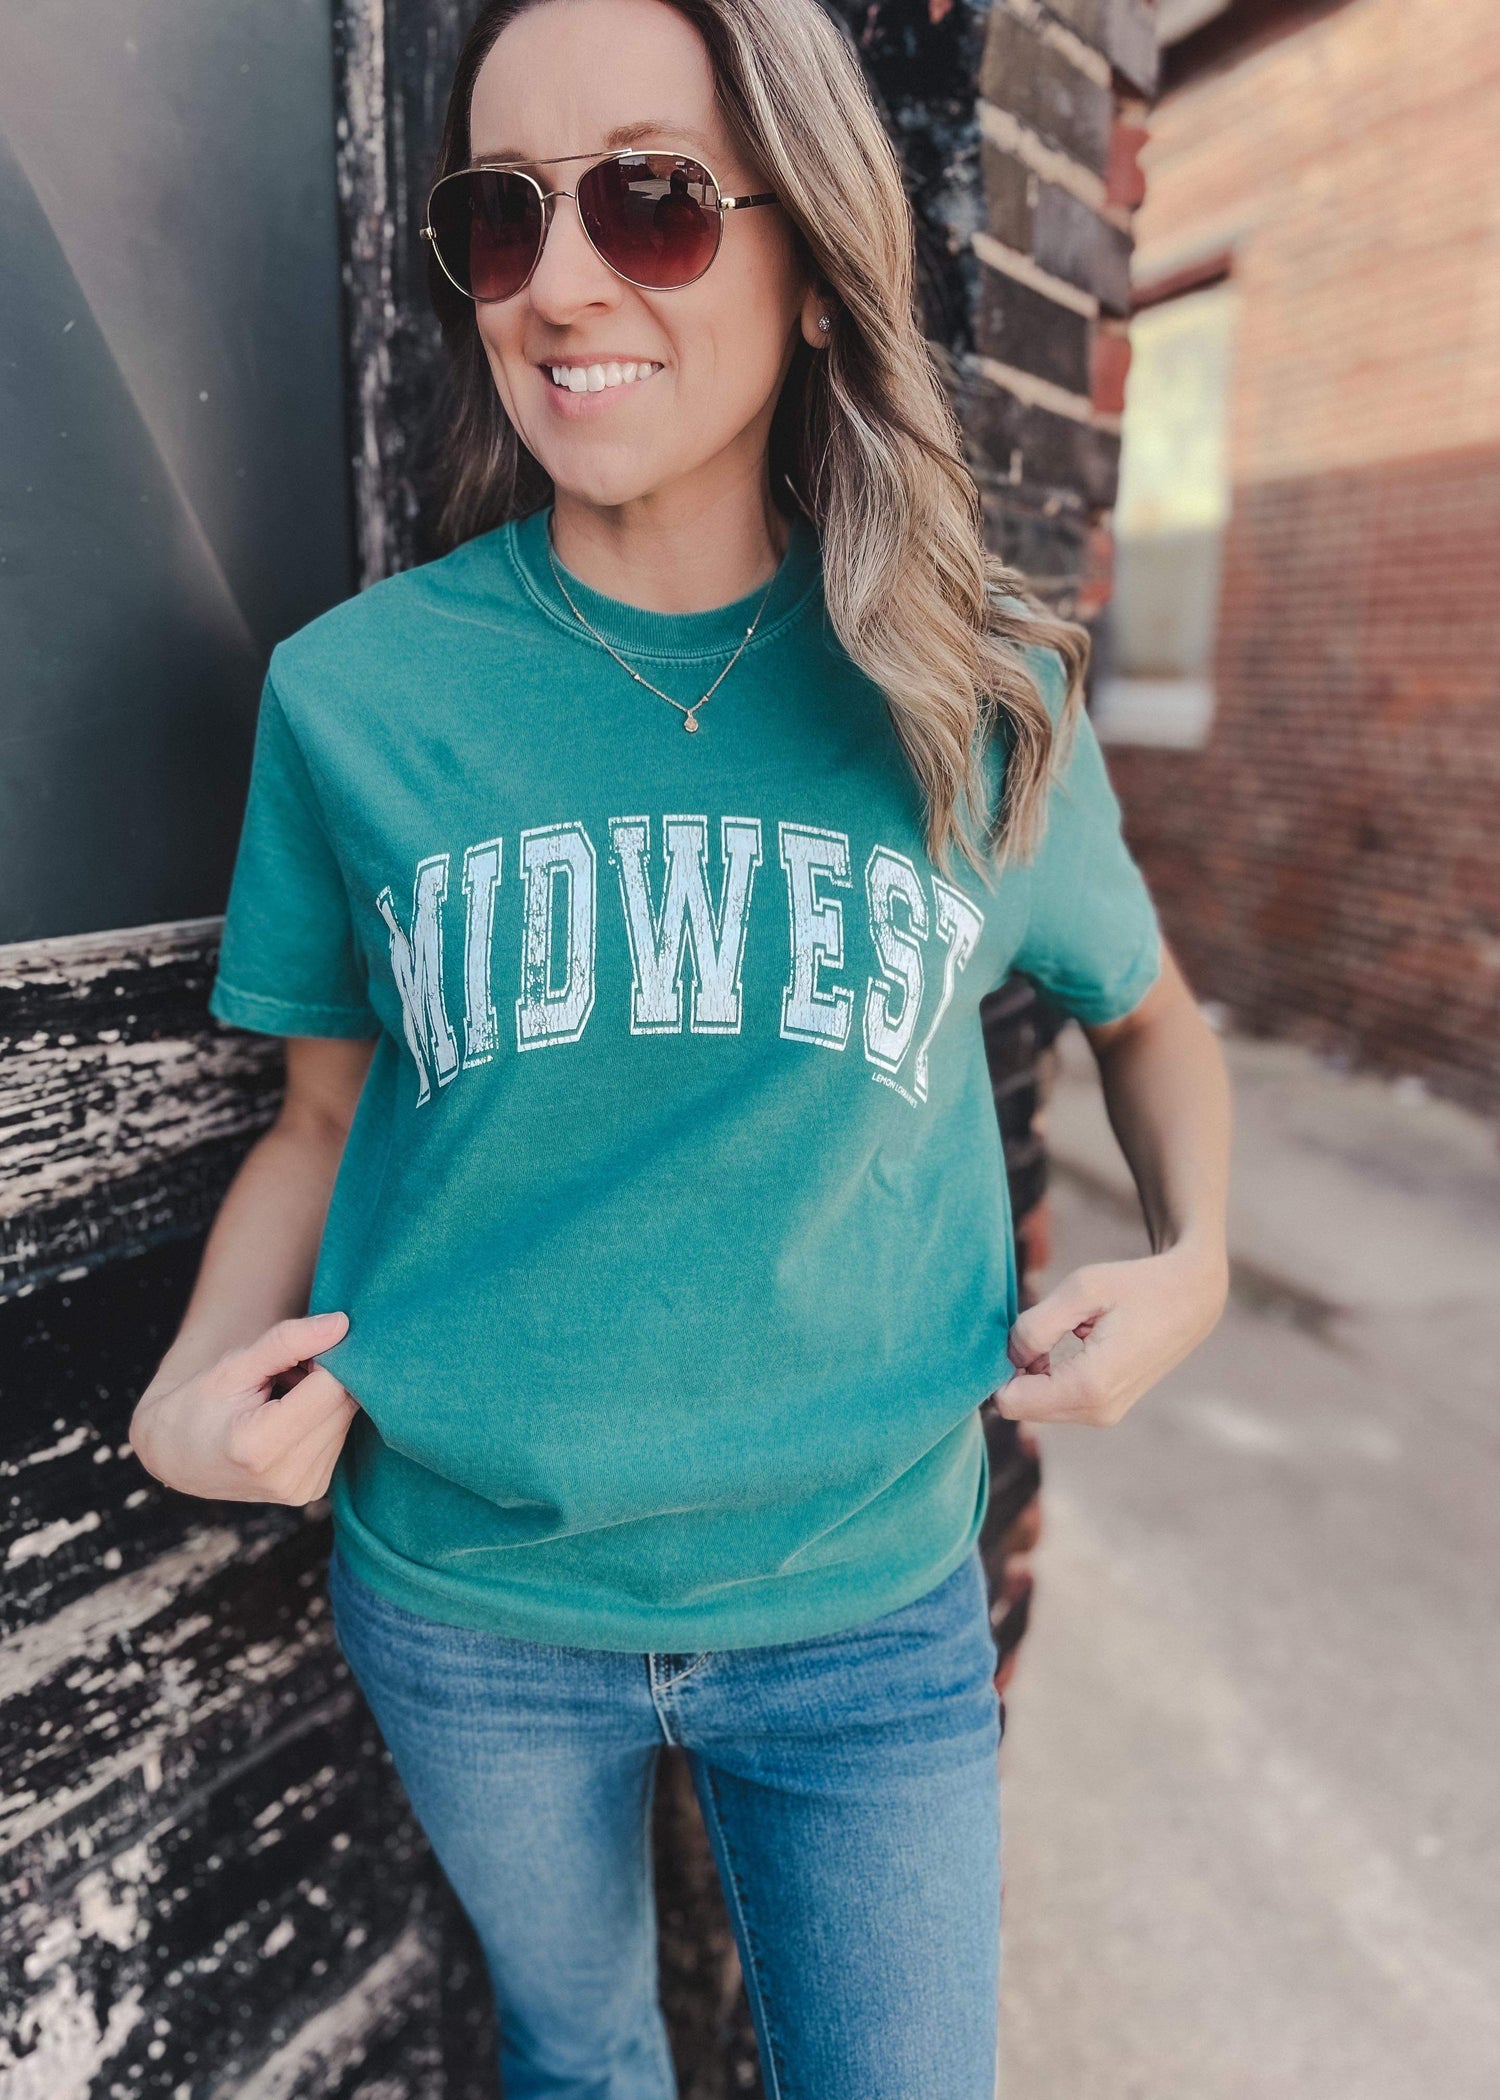 MIDWEST Comfort Color Graphic Tee